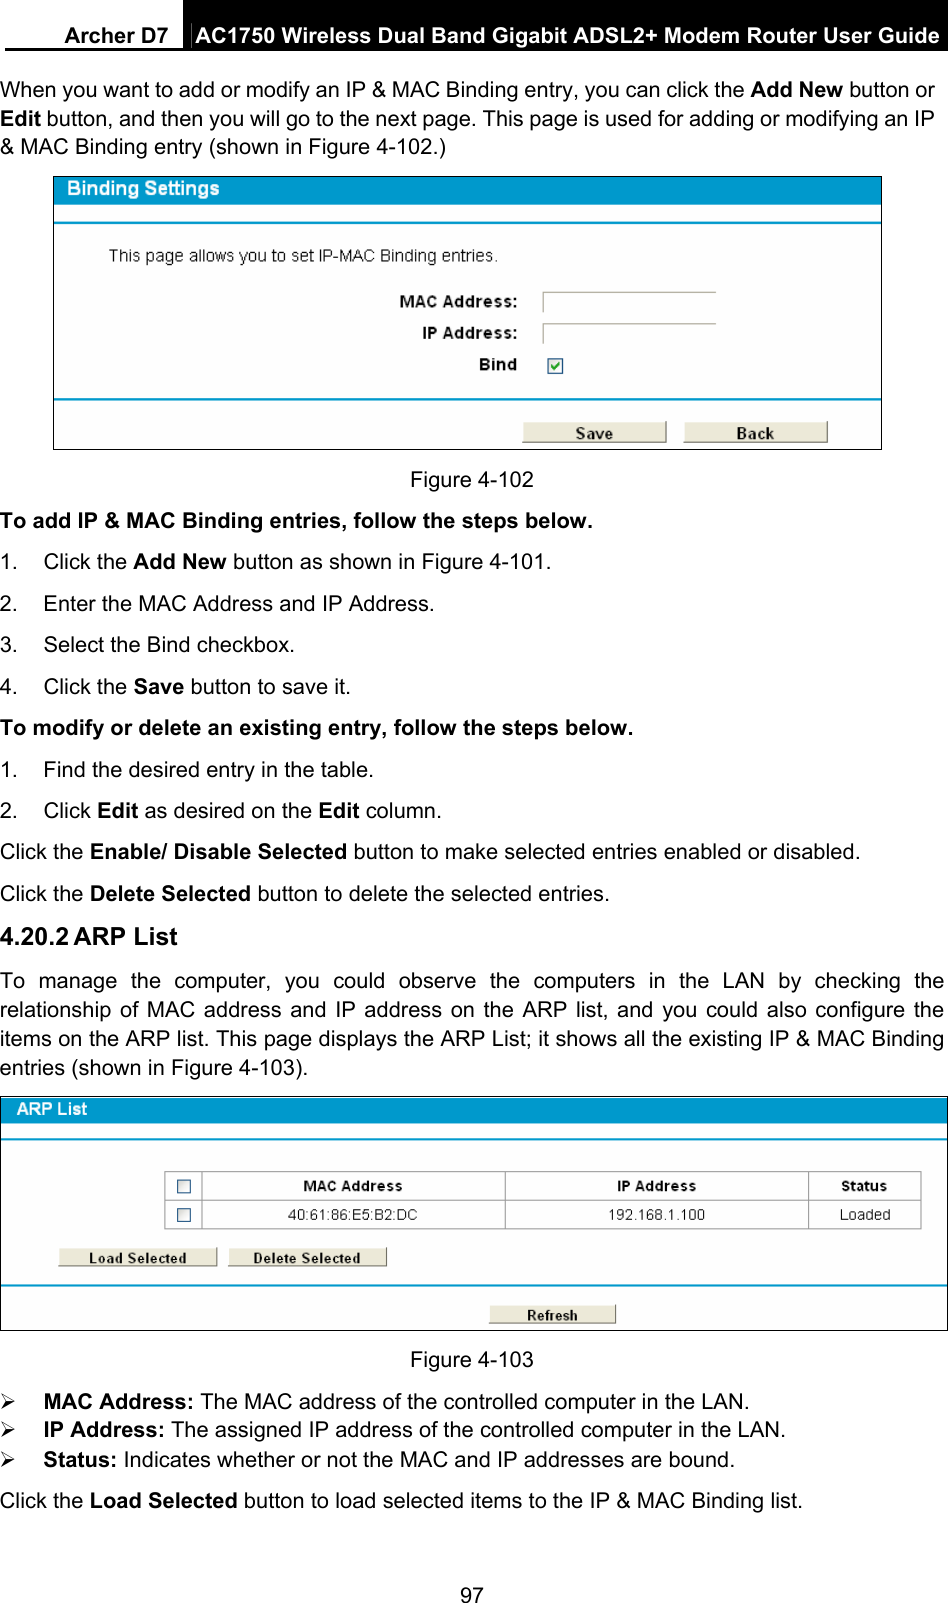 Archer D7  AC1750 Wireless Dual Band Gigabit ADSL2+ Modem Router User Guide 97 When you want to add or modify an IP &amp; MAC Binding entry, you can click the Add New button or Edit button, and then you will go to the next page. This page is used for adding or modifying an IP &amp; MAC Binding entry (shown in Figure 4-102.)  Figure 4-102   To add IP &amp; MAC Binding entries, follow the steps below. 1. Click the Add New button as shown in Figure 4-101.  2.  Enter the MAC Address and IP Address. 3.  Select the Bind checkbox.   4. Click the Save button to save it. To modify or delete an existing entry, follow the steps below. 1.  Find the desired entry in the table.   2. Click Edit as desired on the Edit column.   Click the Enable/ Disable Selected button to make selected entries enabled or disabled. Click the Delete Selected button to delete the selected entries. 4.20.2 ARP List To manage the computer, you could observe the computers in the LAN by checking the relationship of MAC address and IP address on the ARP list, and you could also configure the items on the ARP list. This page displays the ARP List; it shows all the existing IP &amp; MAC Binding entries (shown in Figure 4-103).  Figure 4-103  MAC Address: The MAC address of the controlled computer in the LAN.    IP Address: The assigned IP address of the controlled computer in the LAN.    Status: Indicates whether or not the MAC and IP addresses are bound. Click the Load Selected button to load selected items to the IP &amp; MAC Binding list. 